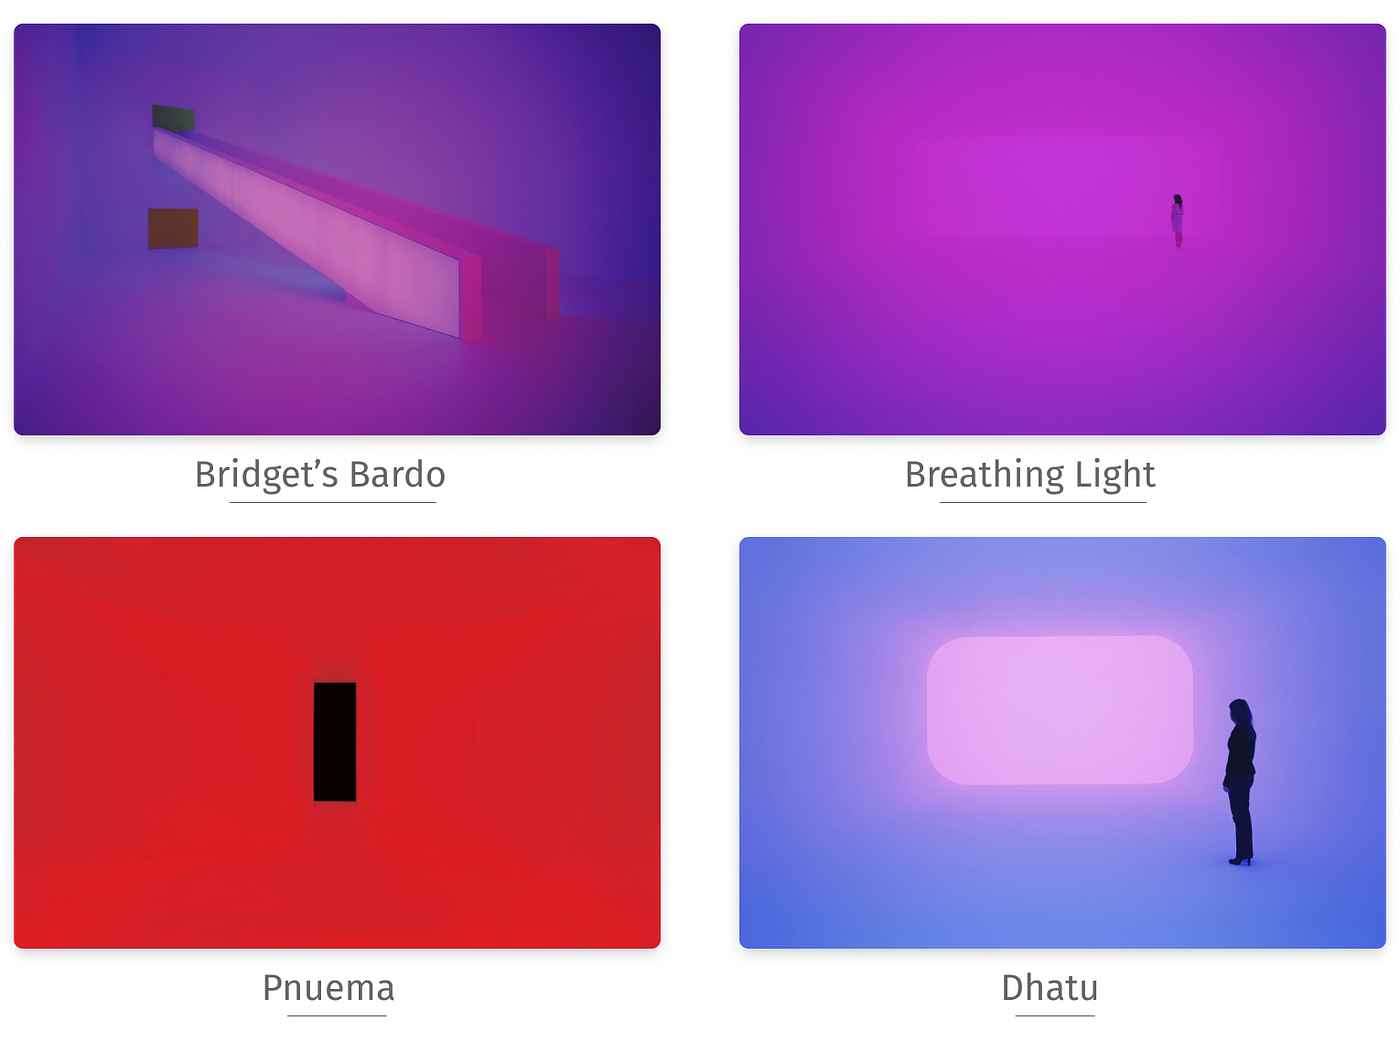 James Turrell: A visionary in light, by Canvs Editorial